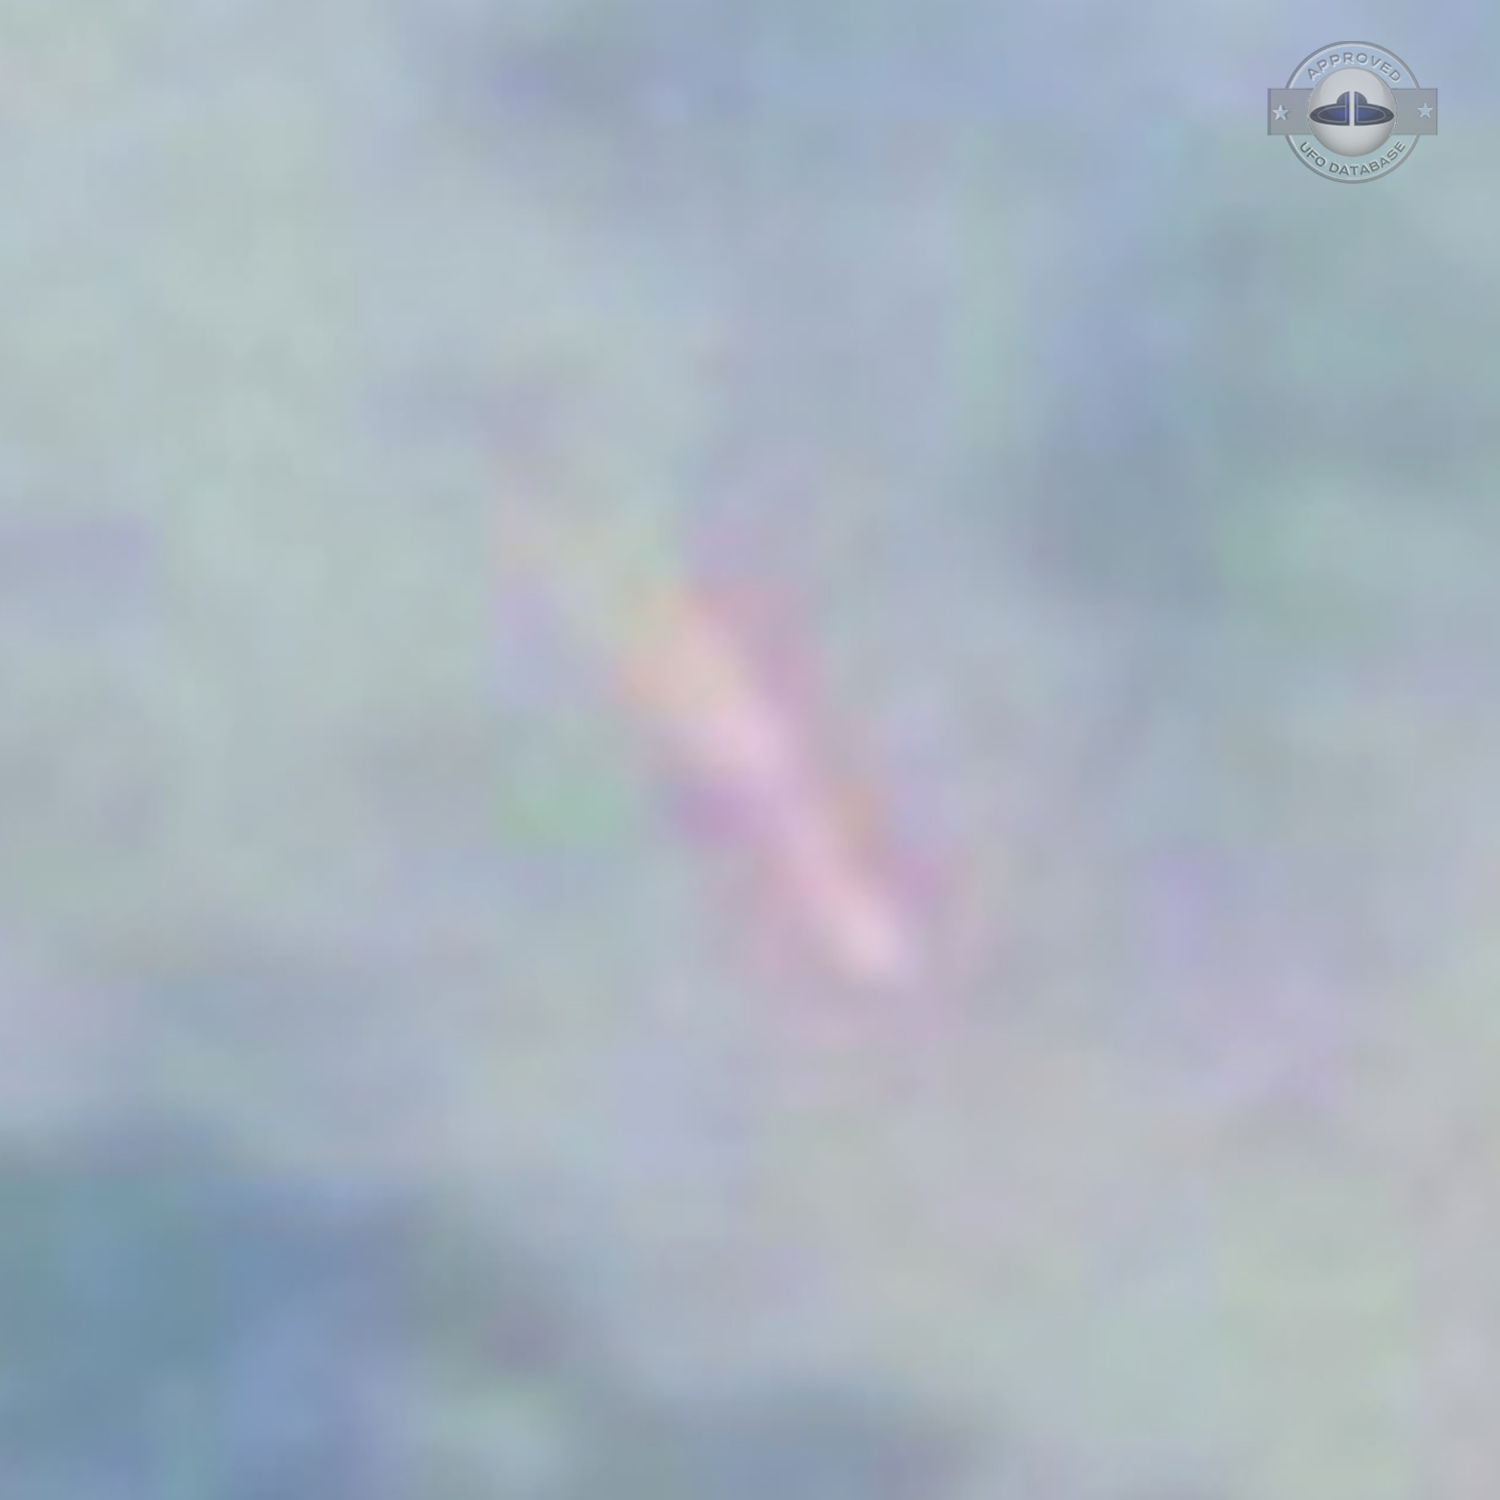 Fire Dragon UFO with glowing tail in clouds over Hefei China | 2011 UFO Picture #234-4